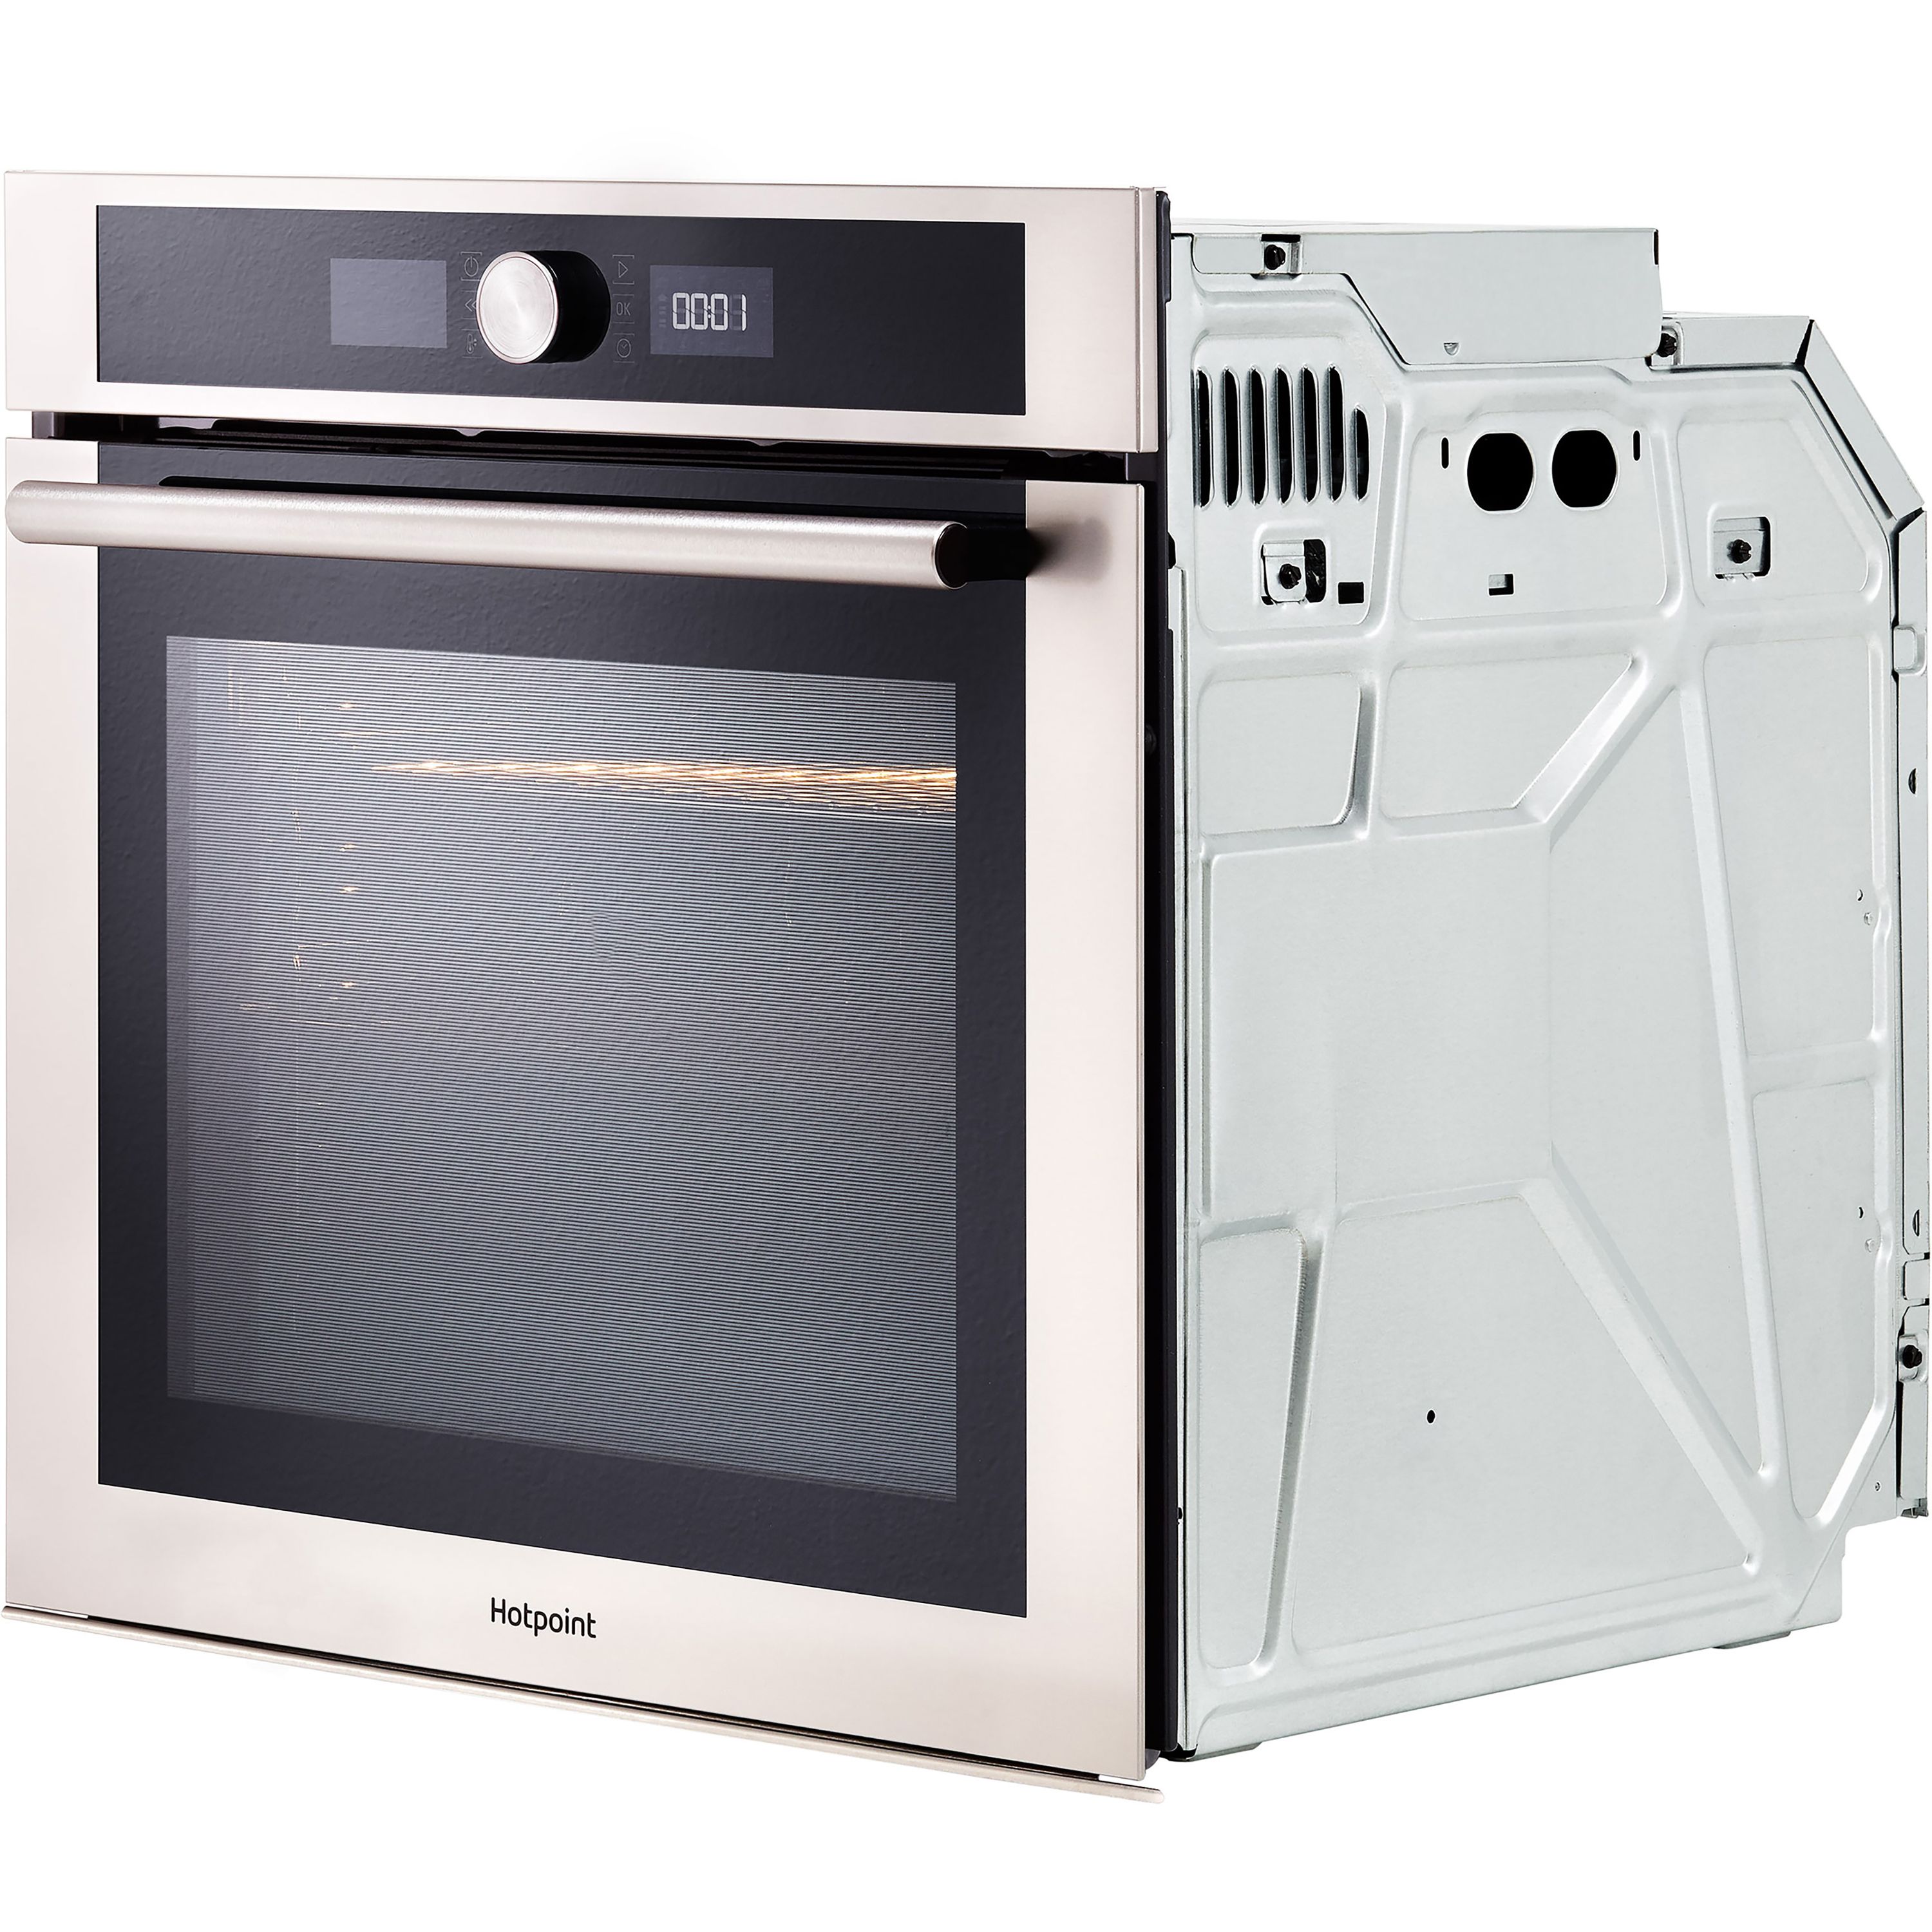 Hotpoint Class 4 SI4854HIX_SS Built-in Single Multifunction Oven - Stainless steel effect